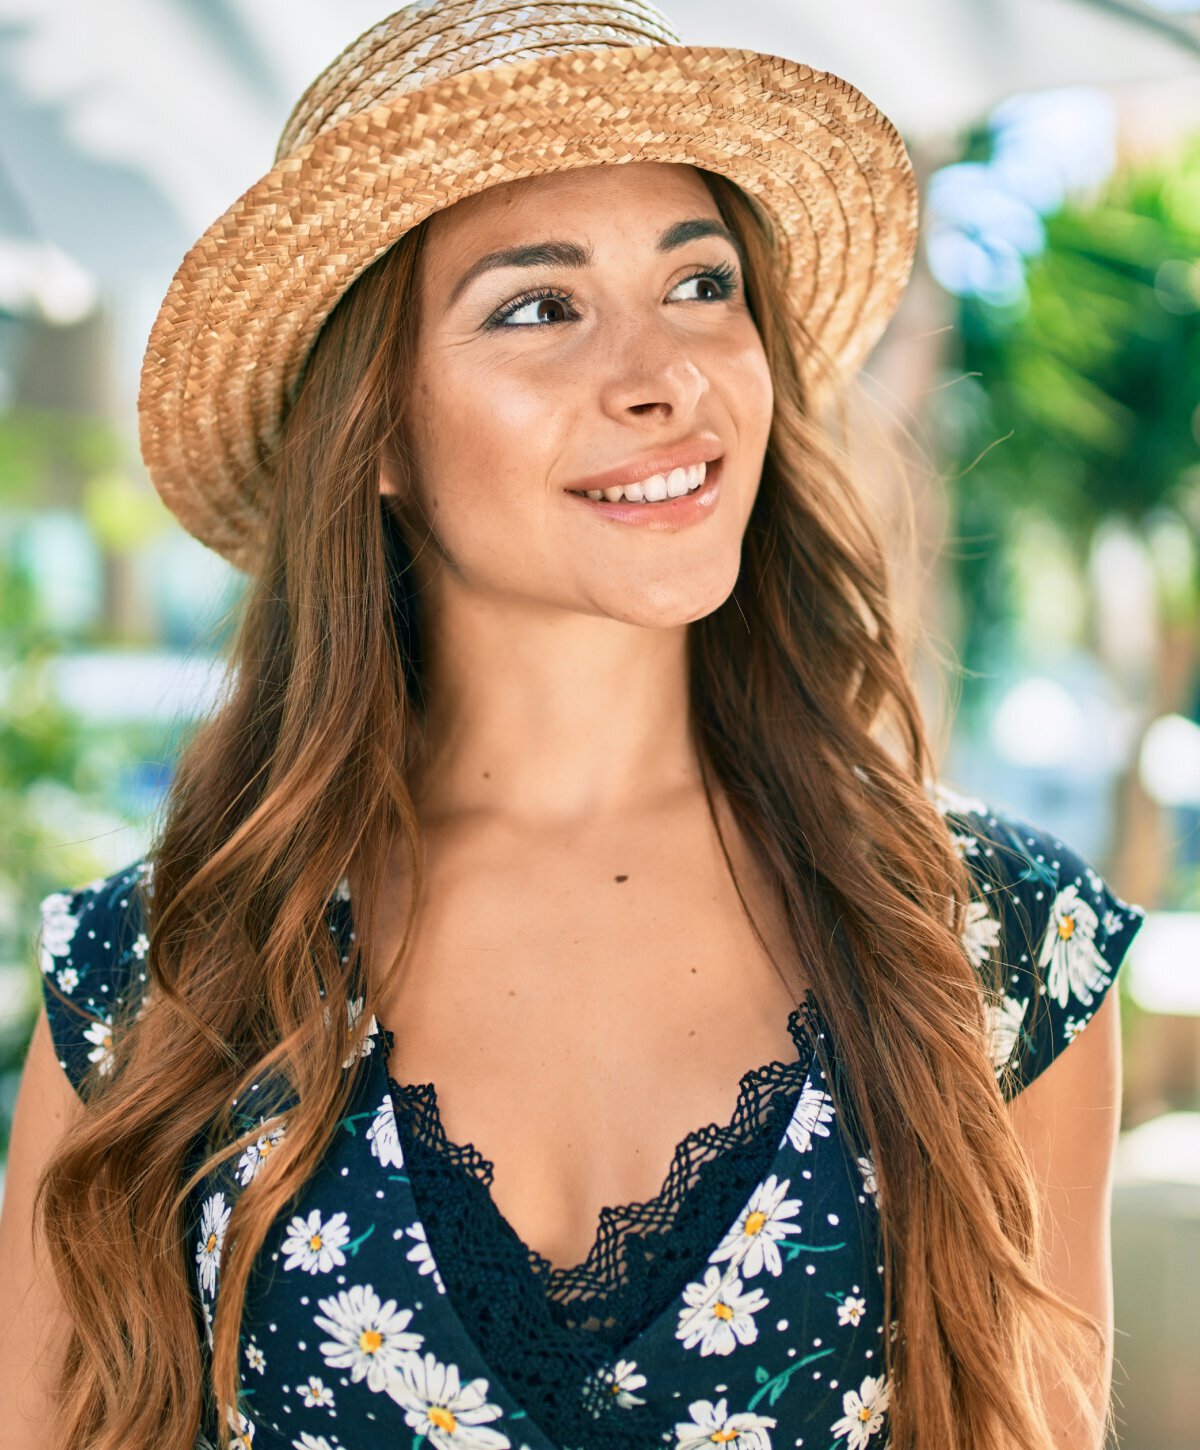 Smiling woman in hat